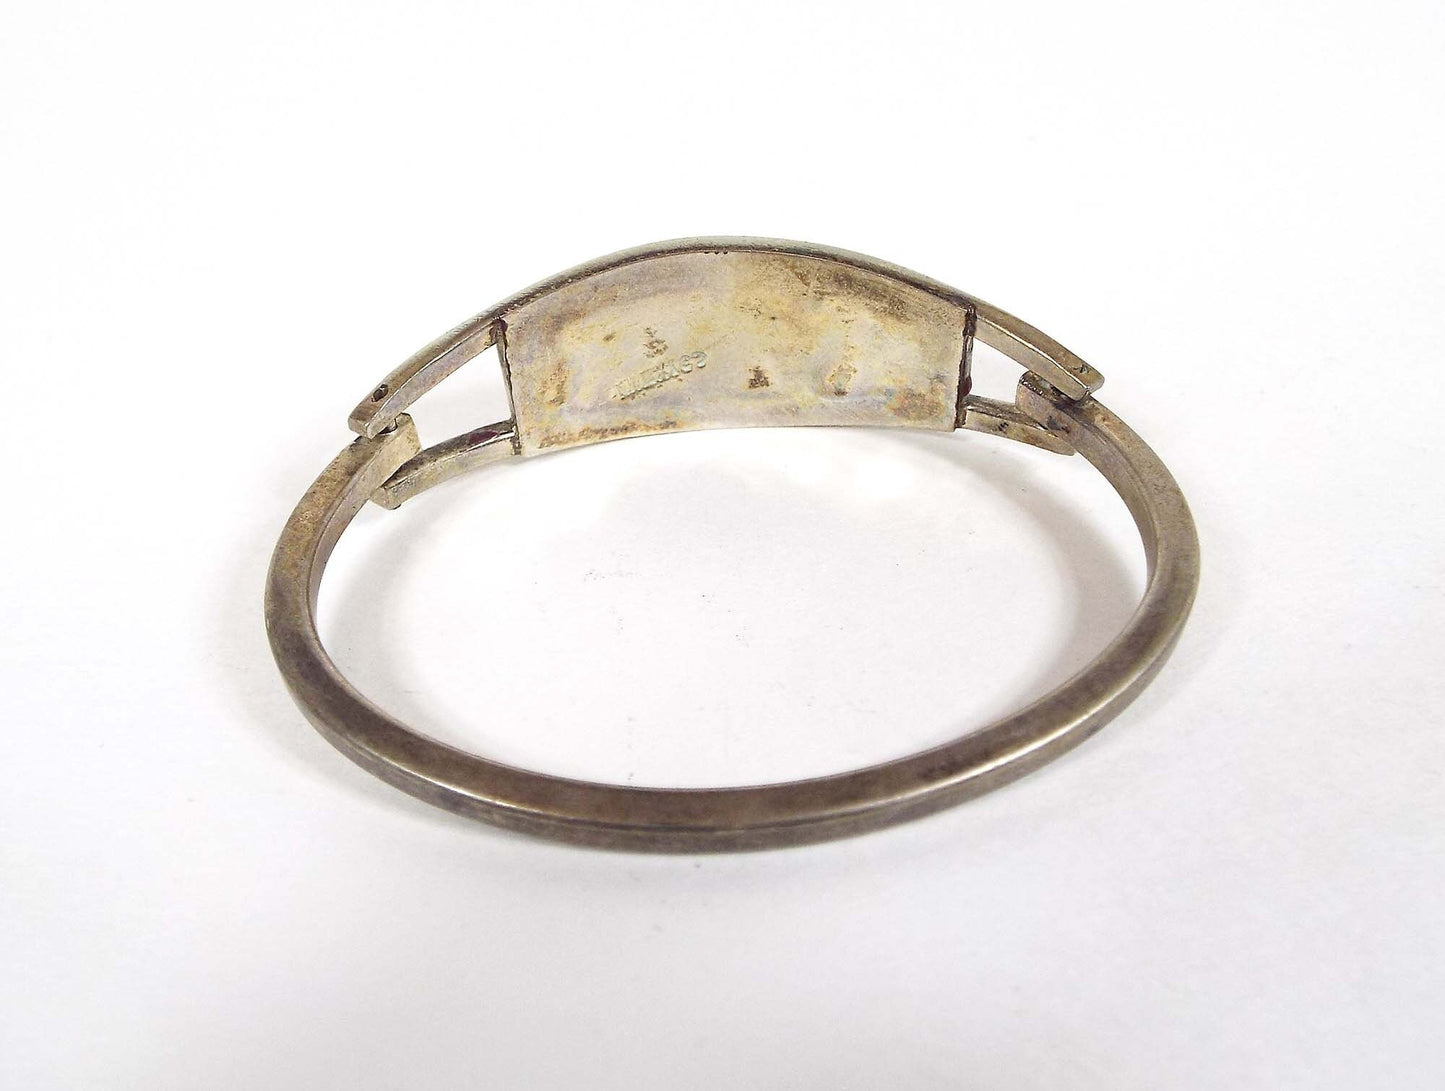 Small Vintage Hinged Flower Bangle Bracelet with Inlaid Abalone